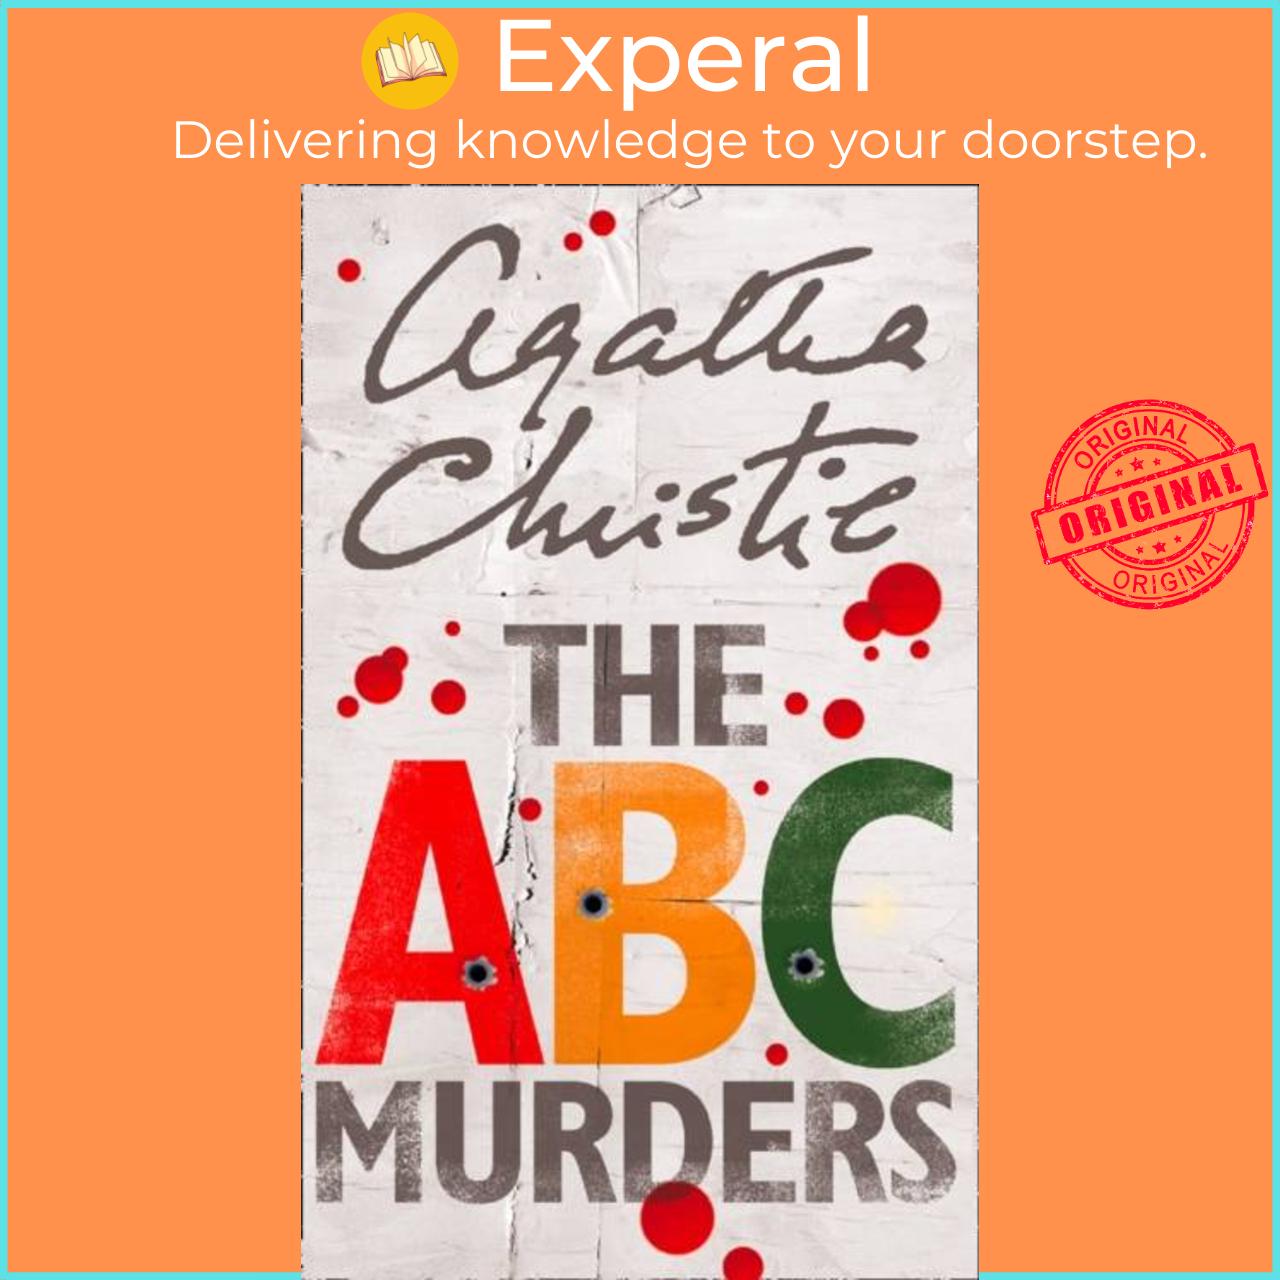 Sách - The ABC Murders by Agatha Christie (UK edition, paperback)